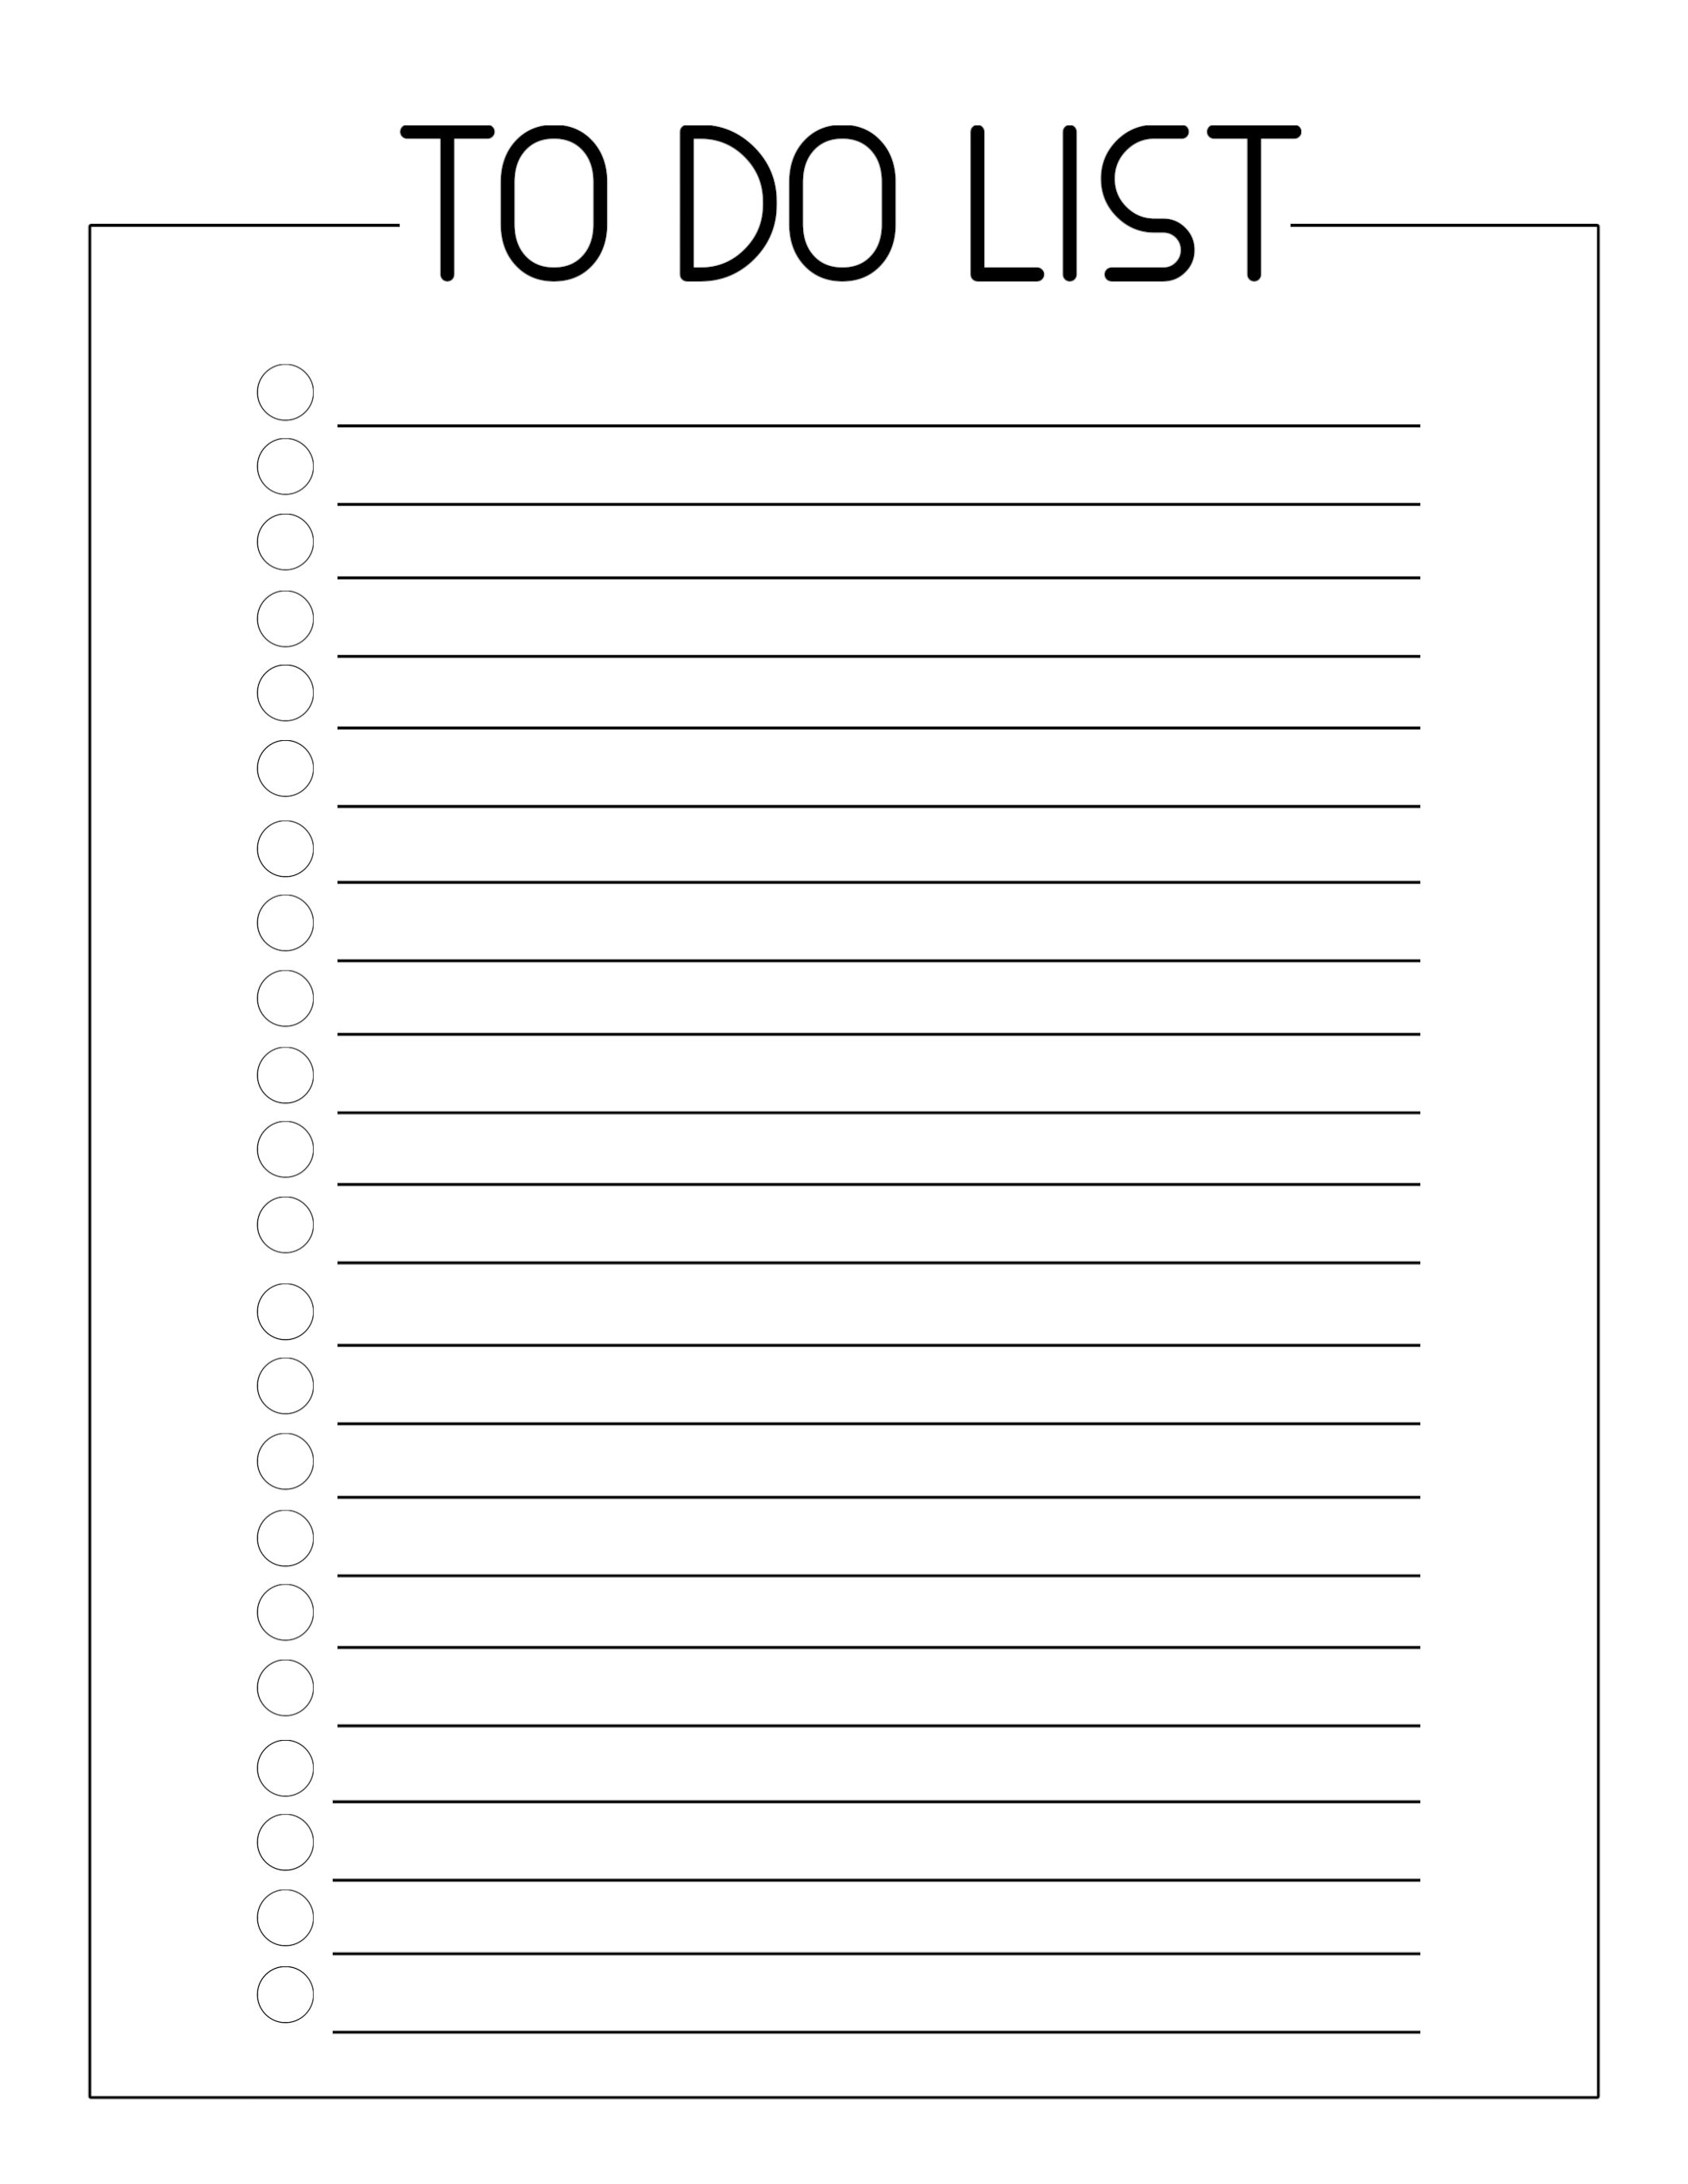 Free Printable To Do Checklist Template - Paper Trail Design With Regard To Blank To Do List Template